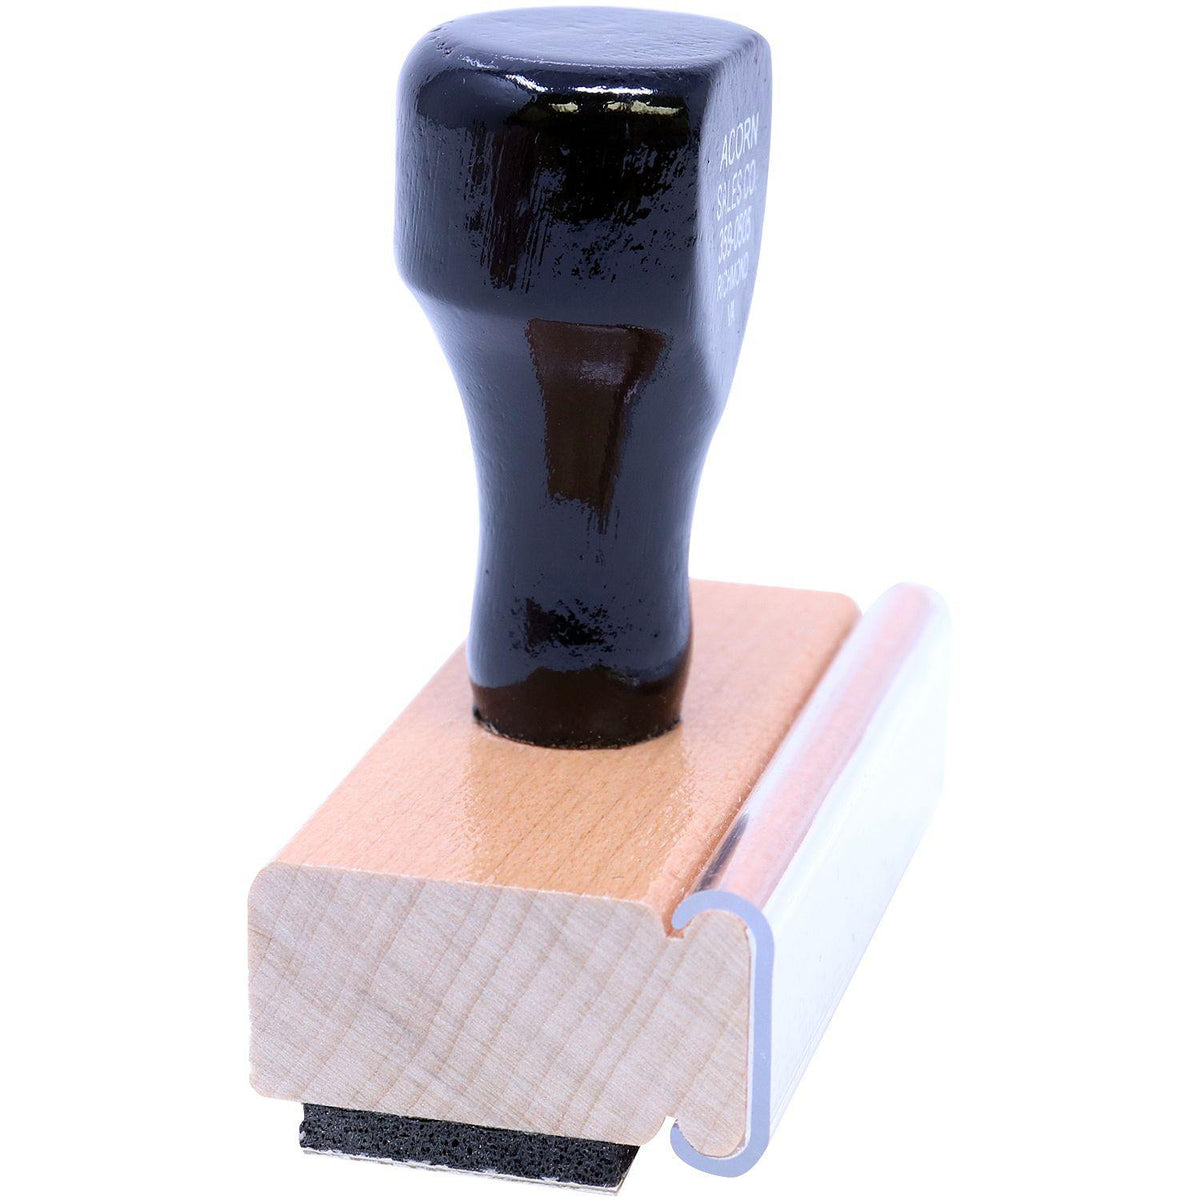 Side View of Surface Rubber Stamp at an Angle